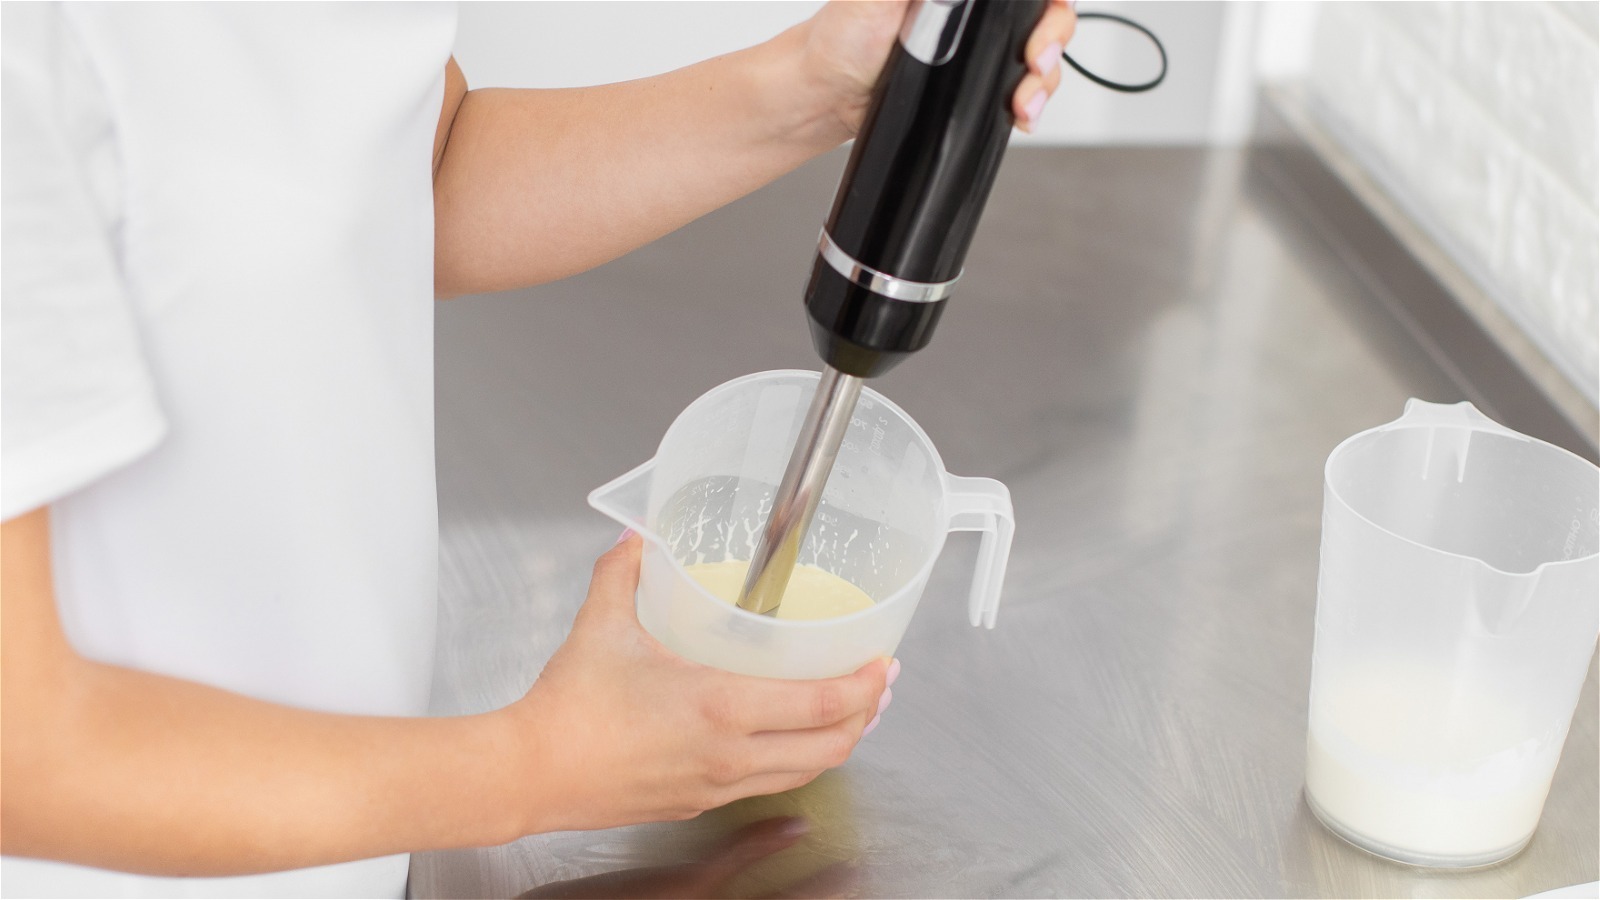 How to use an immersion blender